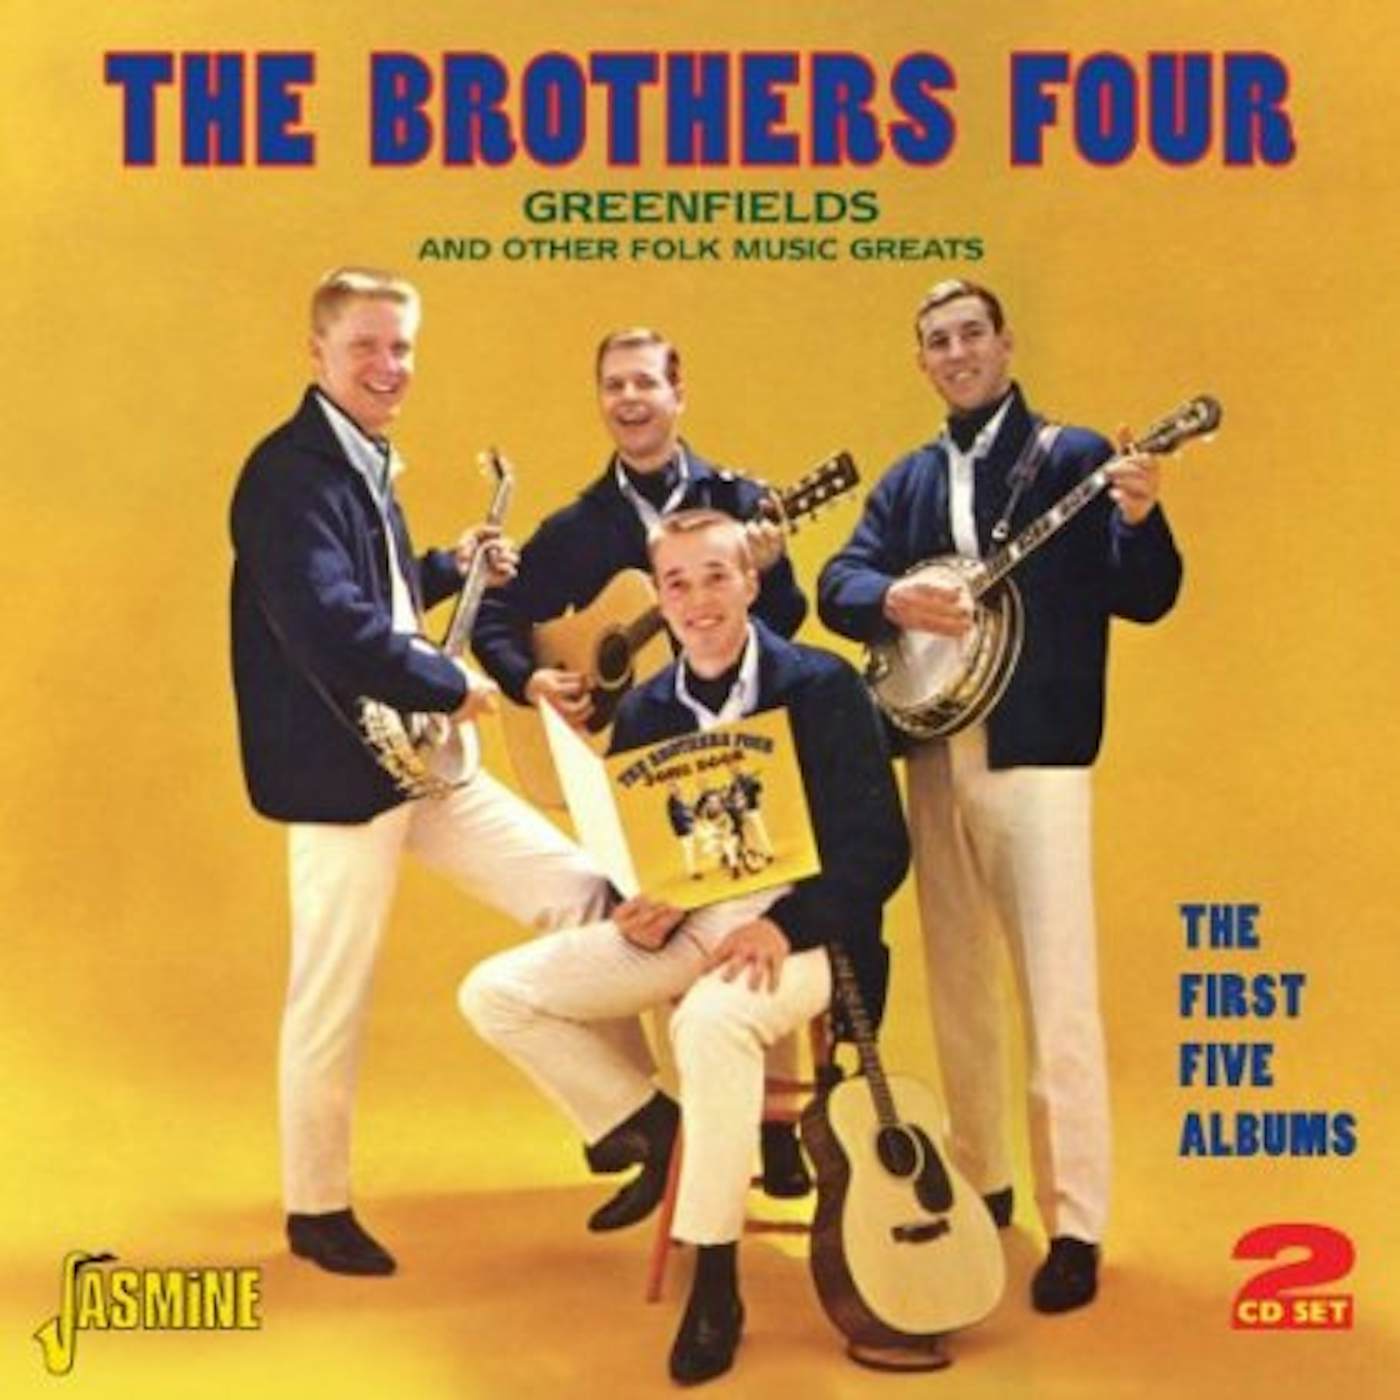 The Brothers Four GREENFIELDS & OTHER FOLK MUSIC GREATS CD